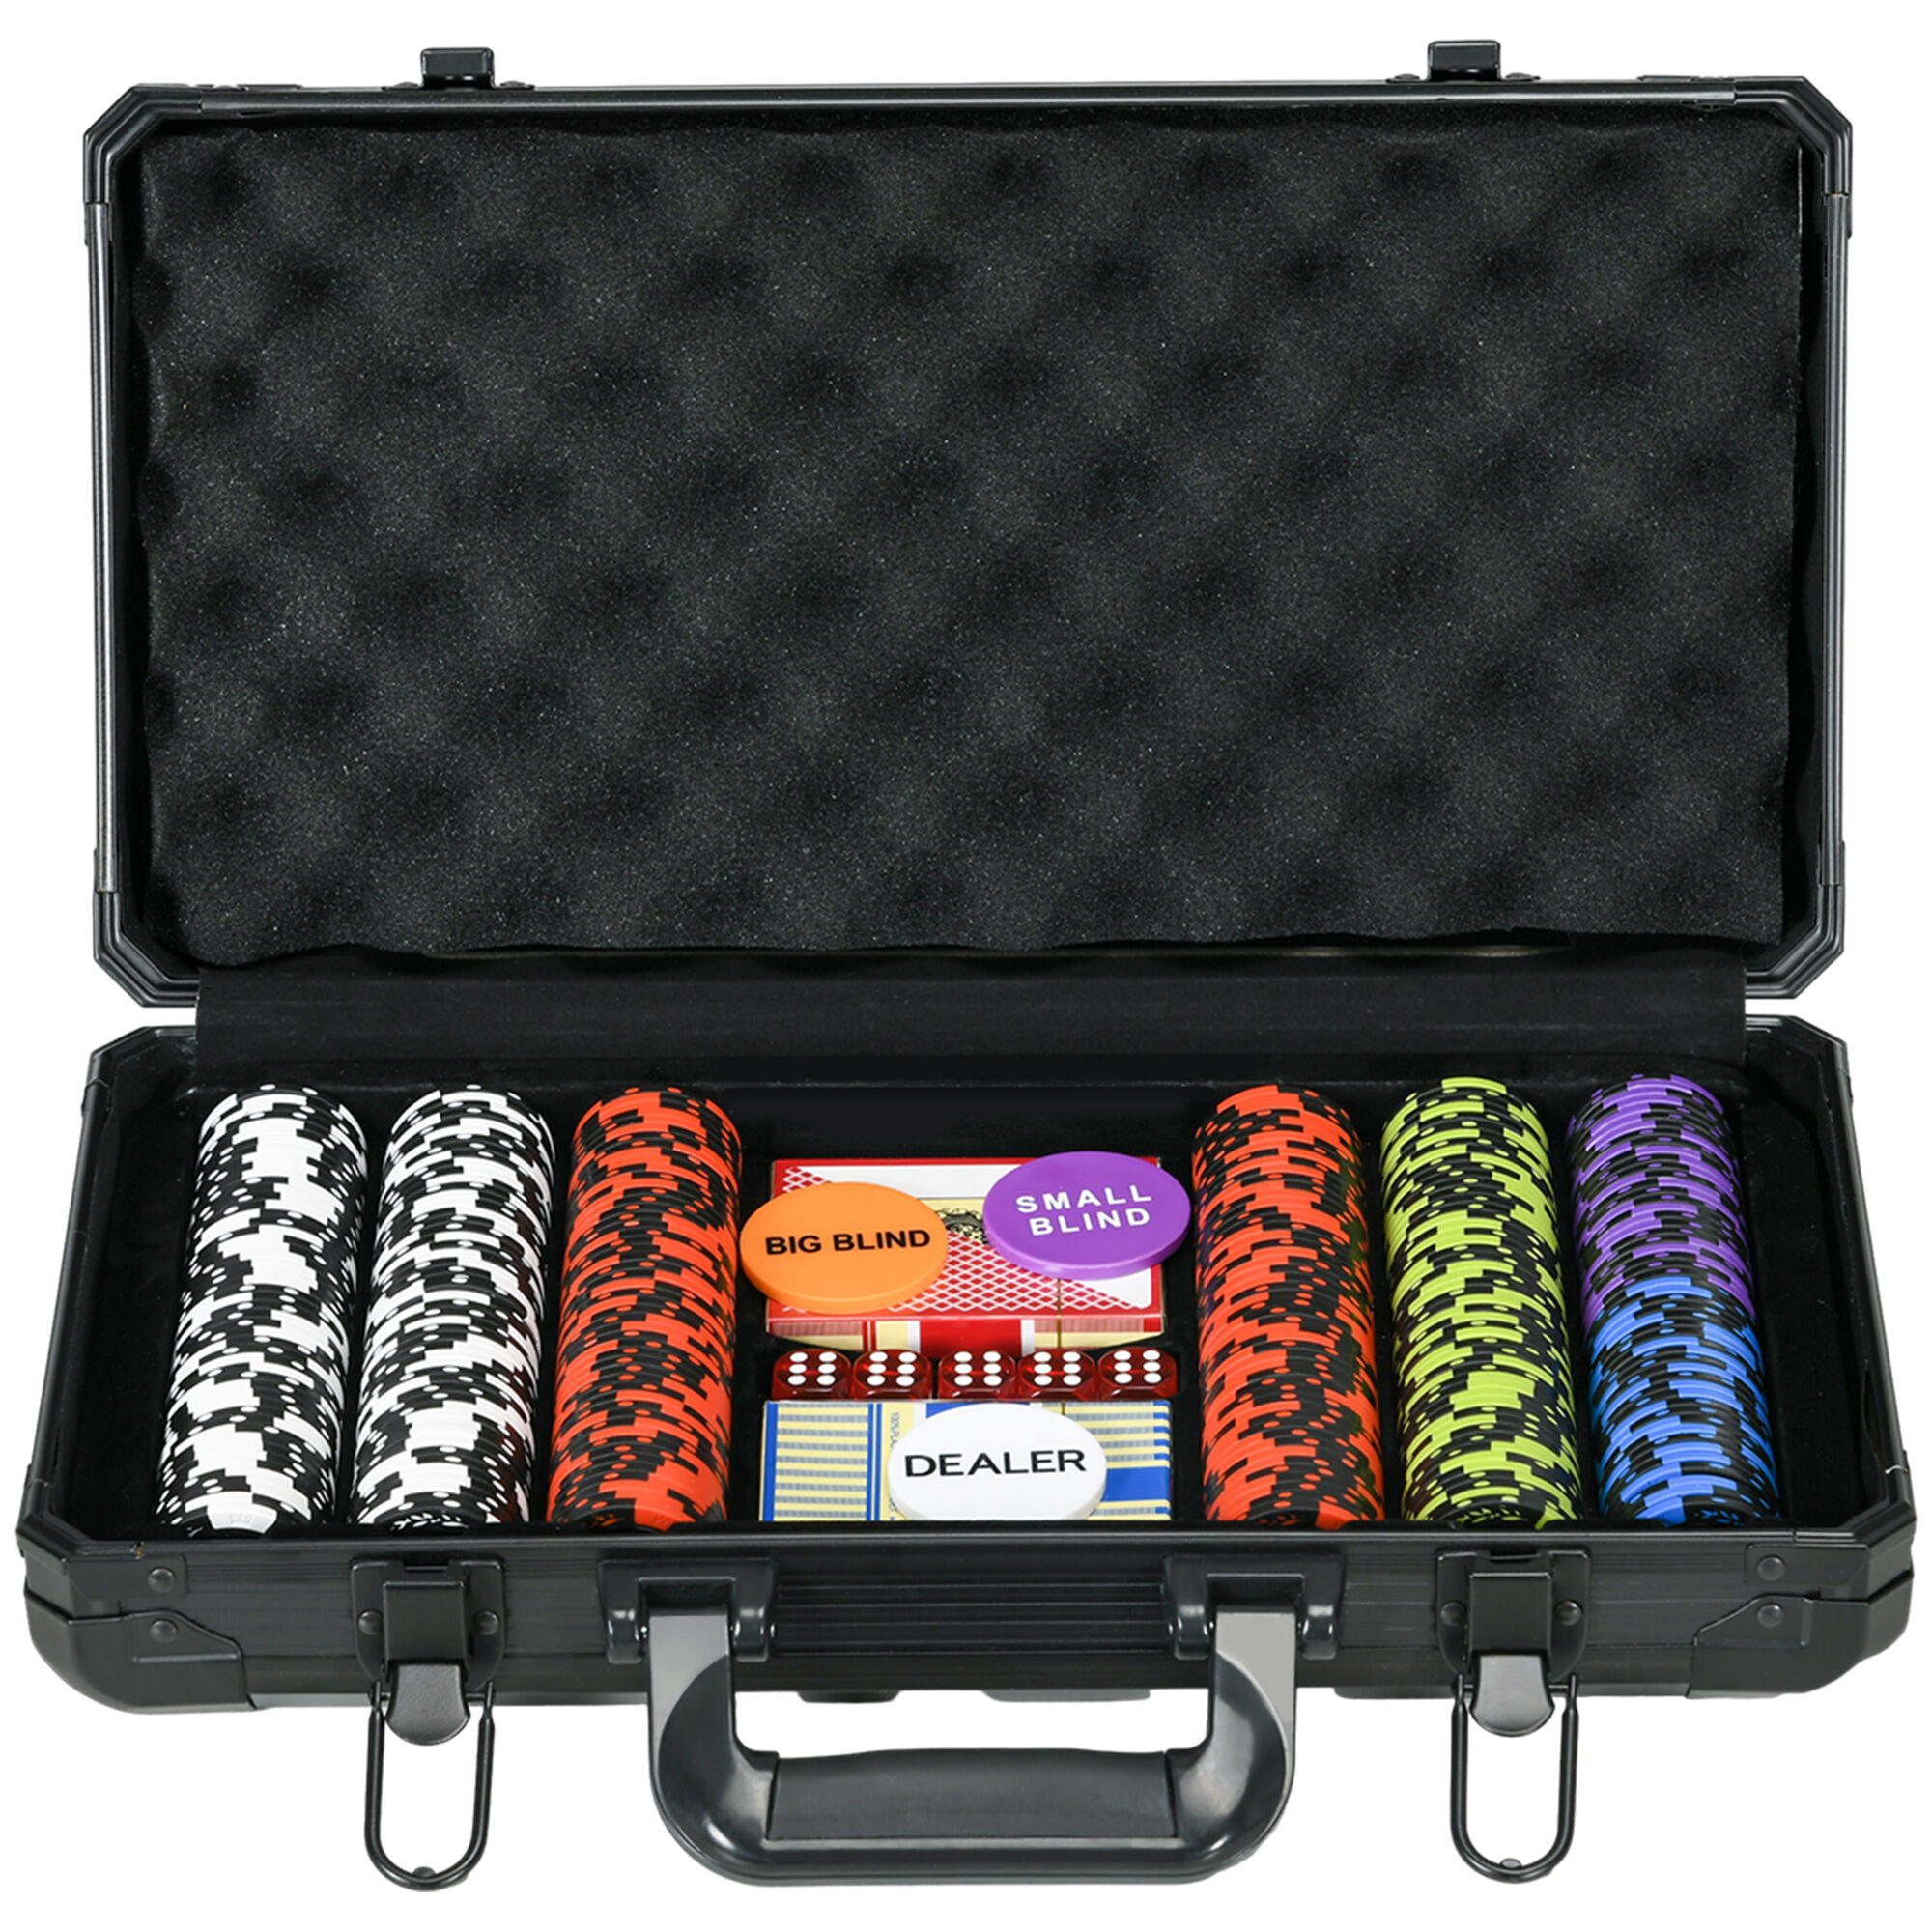 Soozier 300PCs 14 Gram Clay Poker Chips Set Casino Poker Chips with Aluminum Case, Playing Cards, Dealer Button, 5 Dices